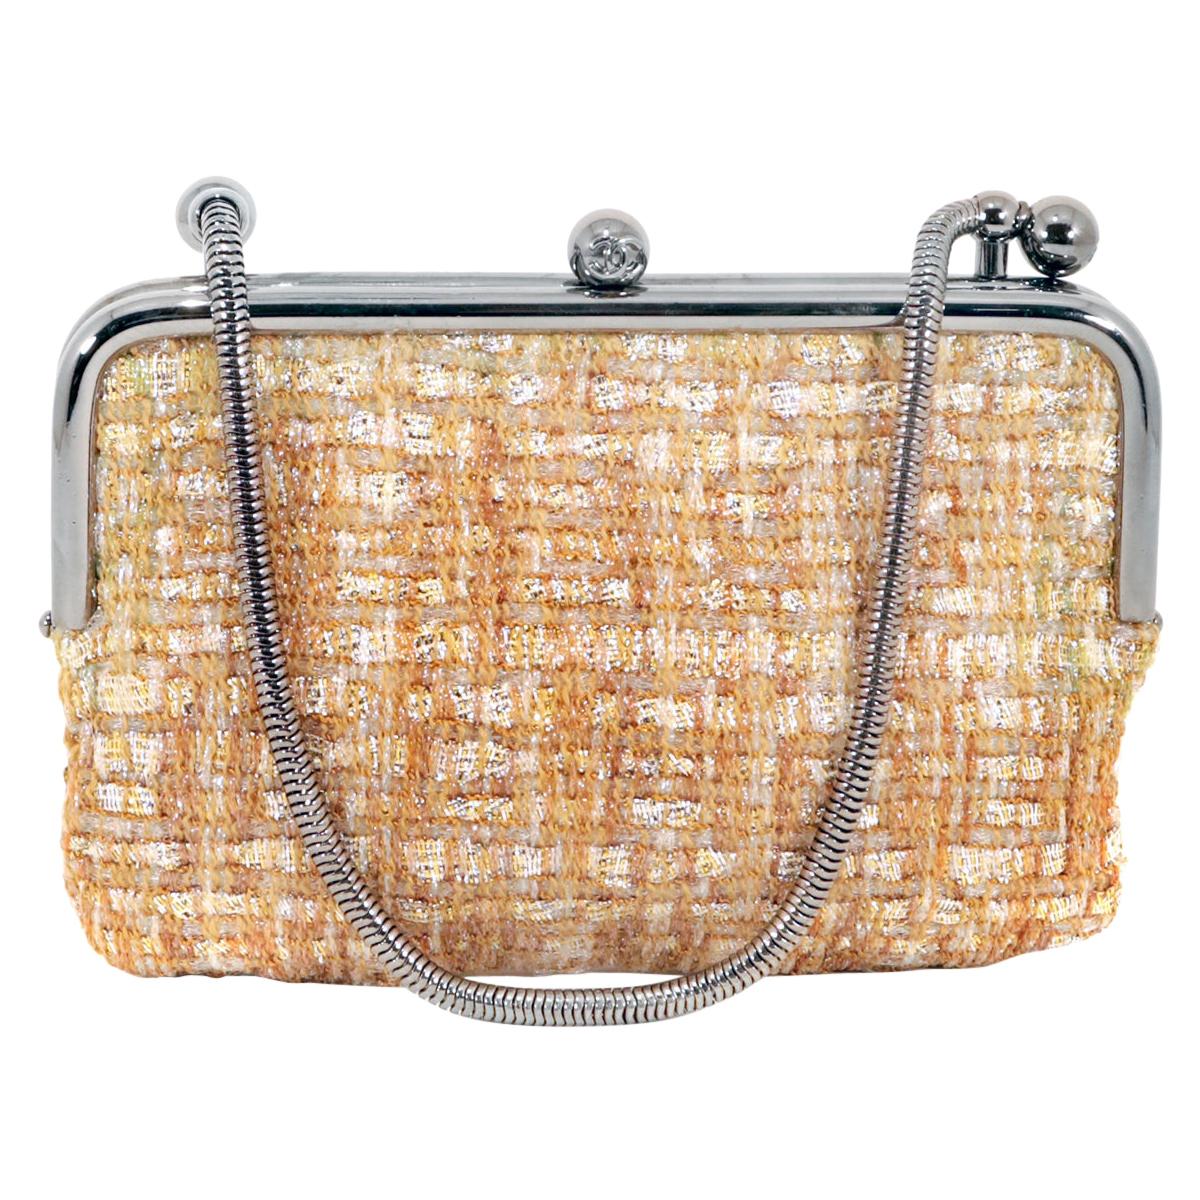 Chanel Gold Tweed Couture Collection Kiss Lock Mini Bag